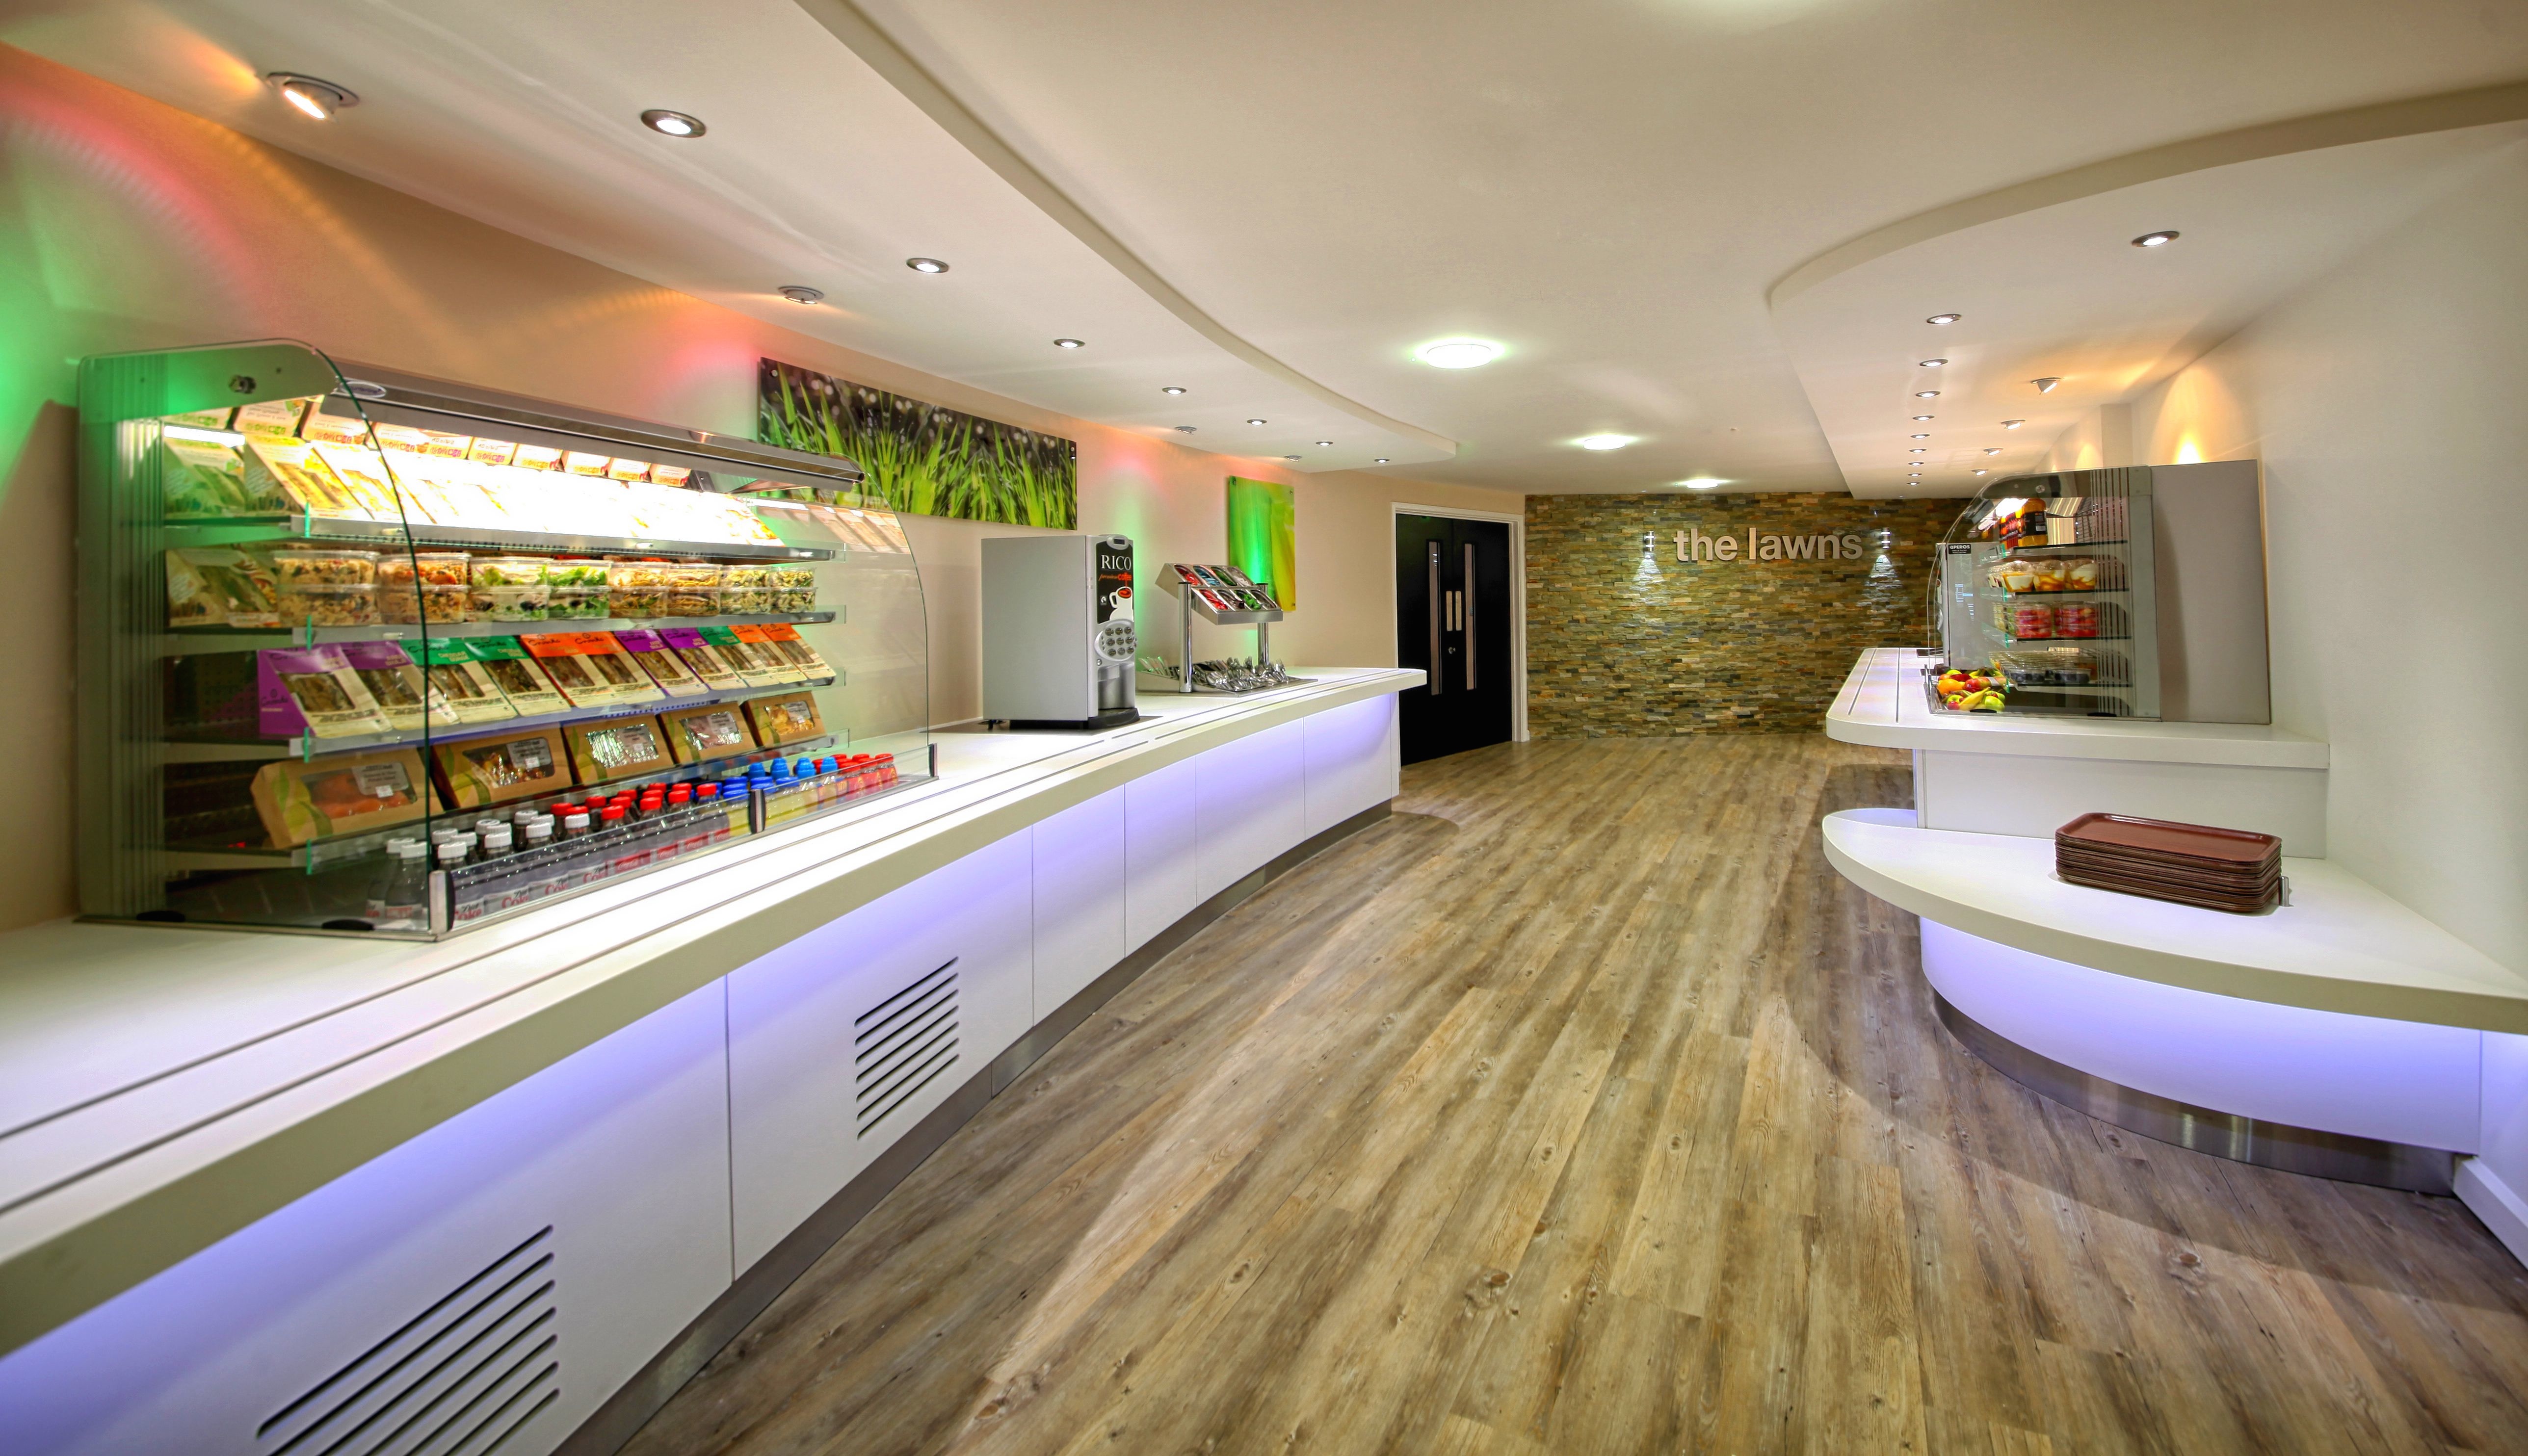 Tristone Pure White - Student Servery Area at the Lawns, University of Hull